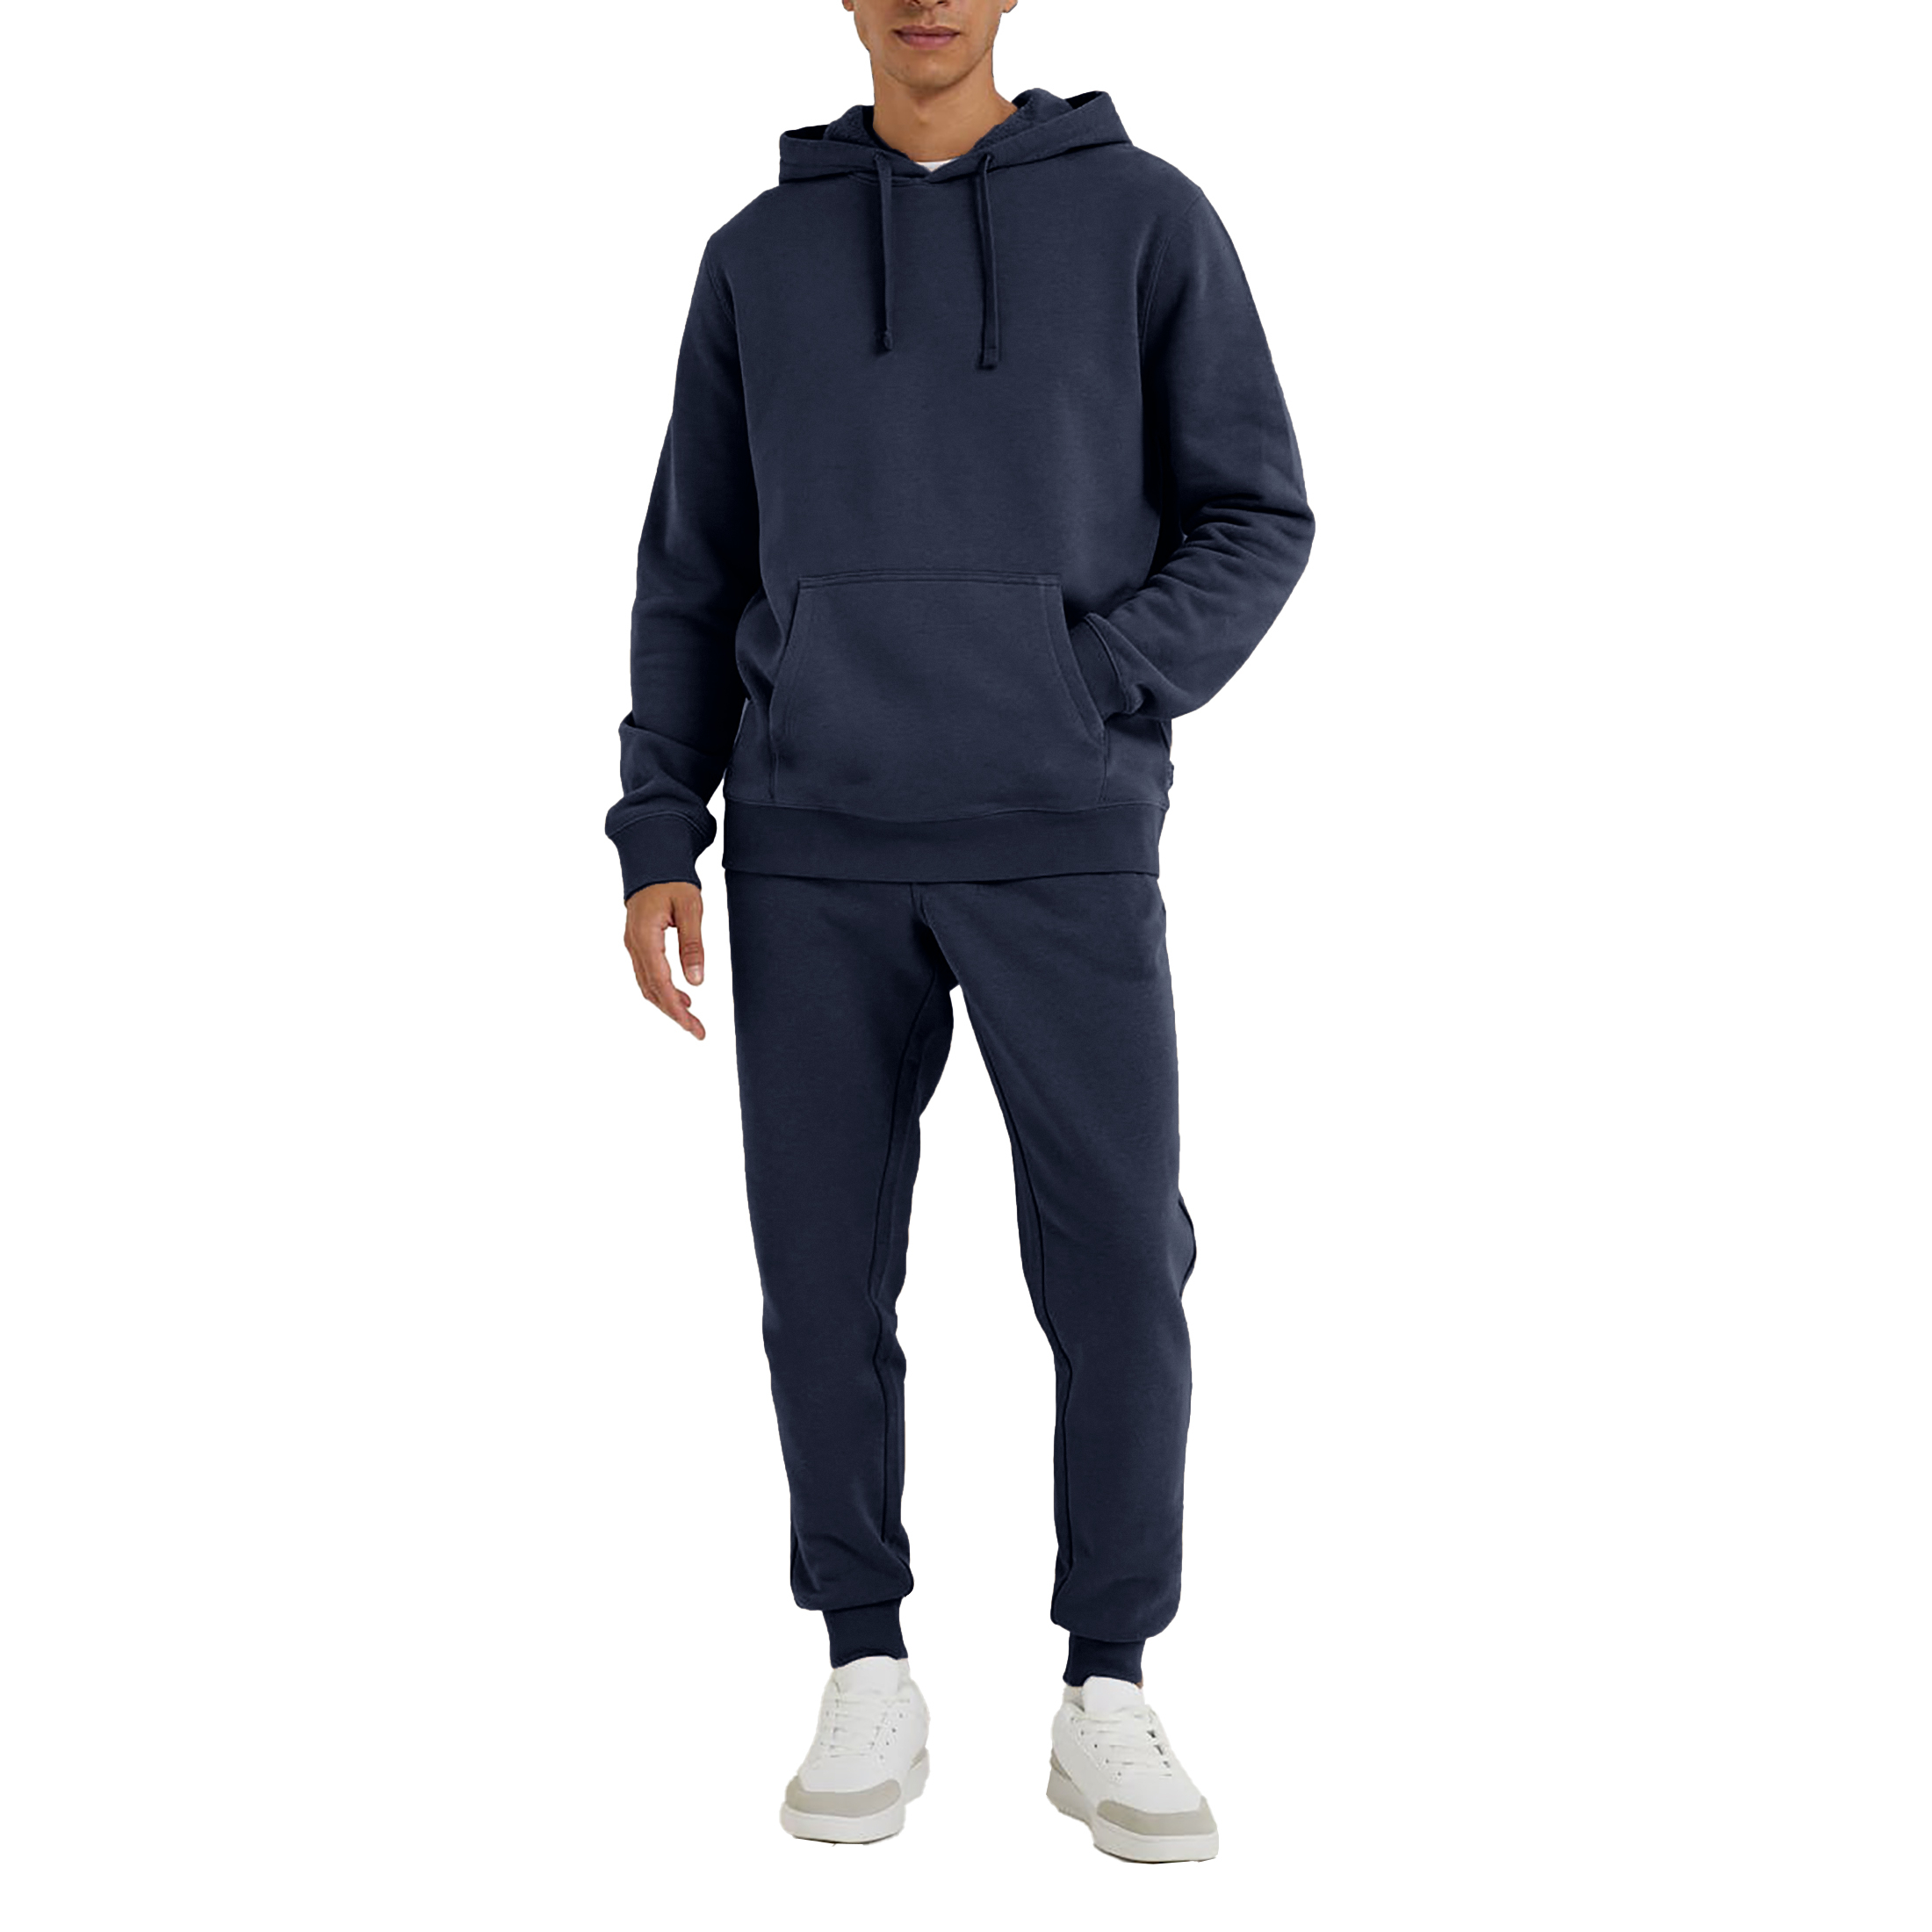 Men's Athletic Warm Jogging Pullover Active Tracksuit - Navy, 2X-Large